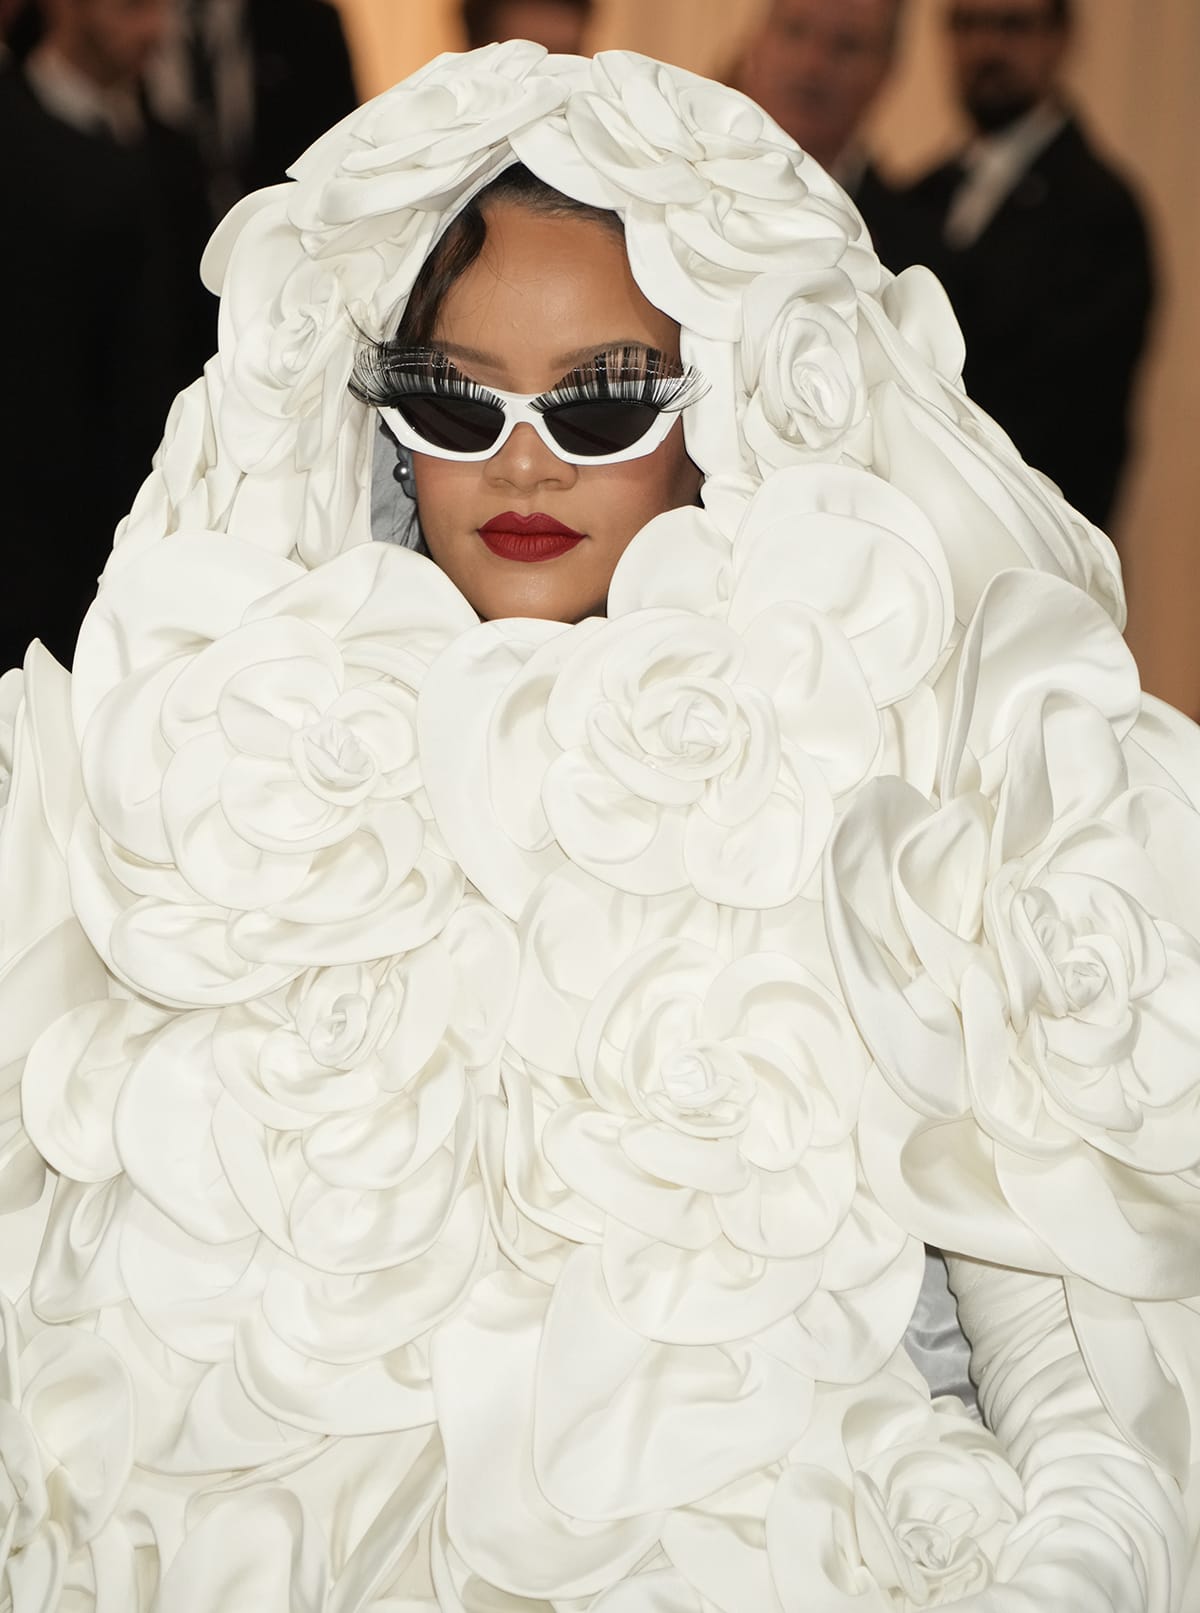 Rihanna adds a pop of bold red lip color to her all-white bridal look and wears a pair of sunglasses with false eyelashes adornment